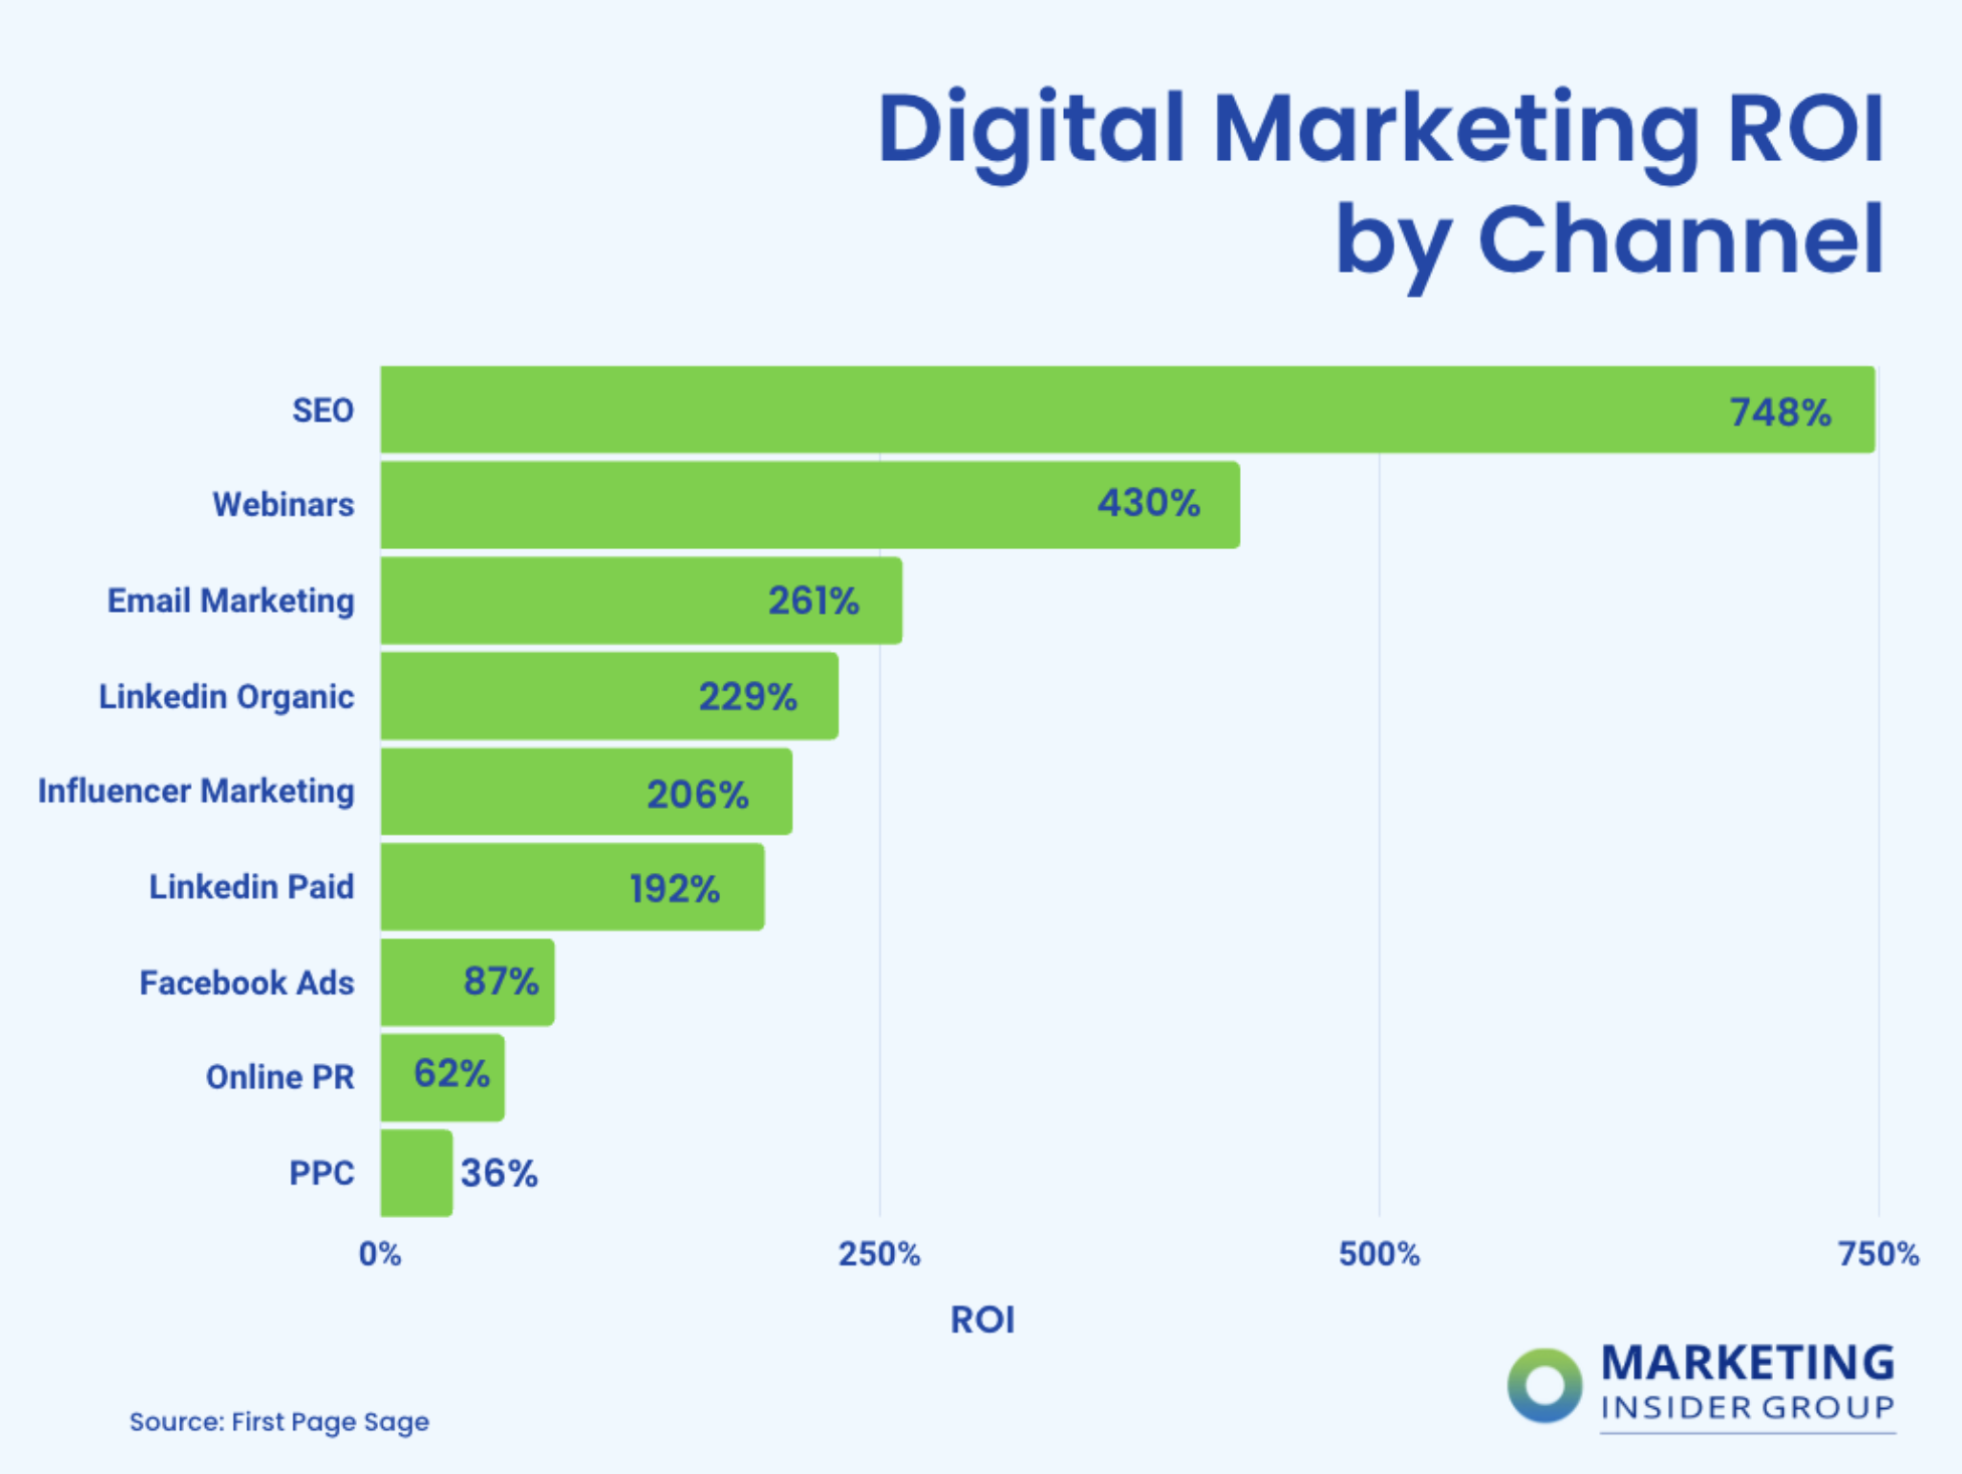 graph shows that SEO digital marketing services offer the highest ROI